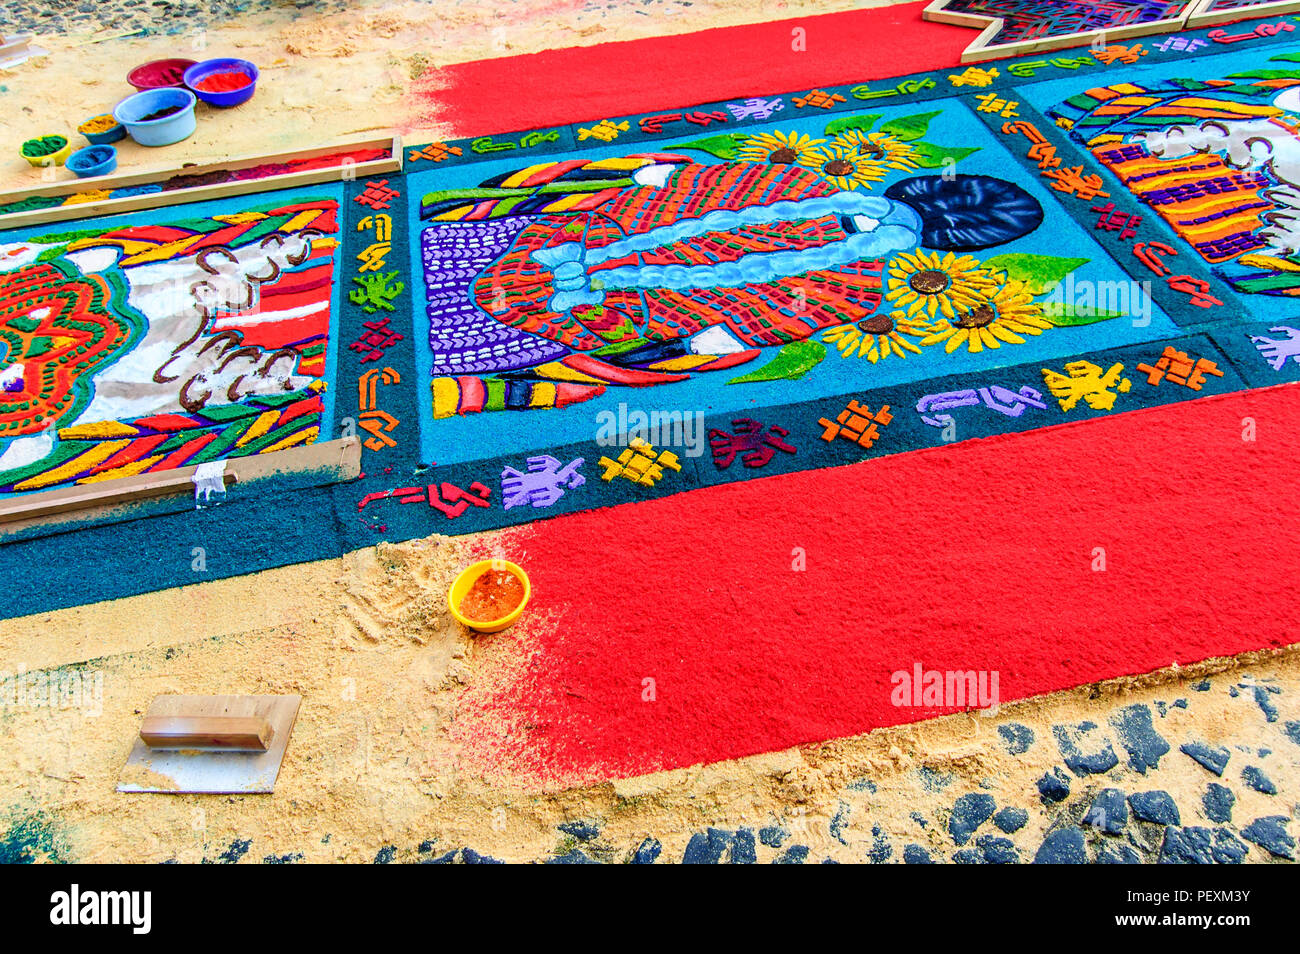 Antigua, Guatemala -  April 1, 2012: Making Palm Sunday procession carpet in UNESCO World Heritage Site with famous Holy Week celebrations. Stock Photo